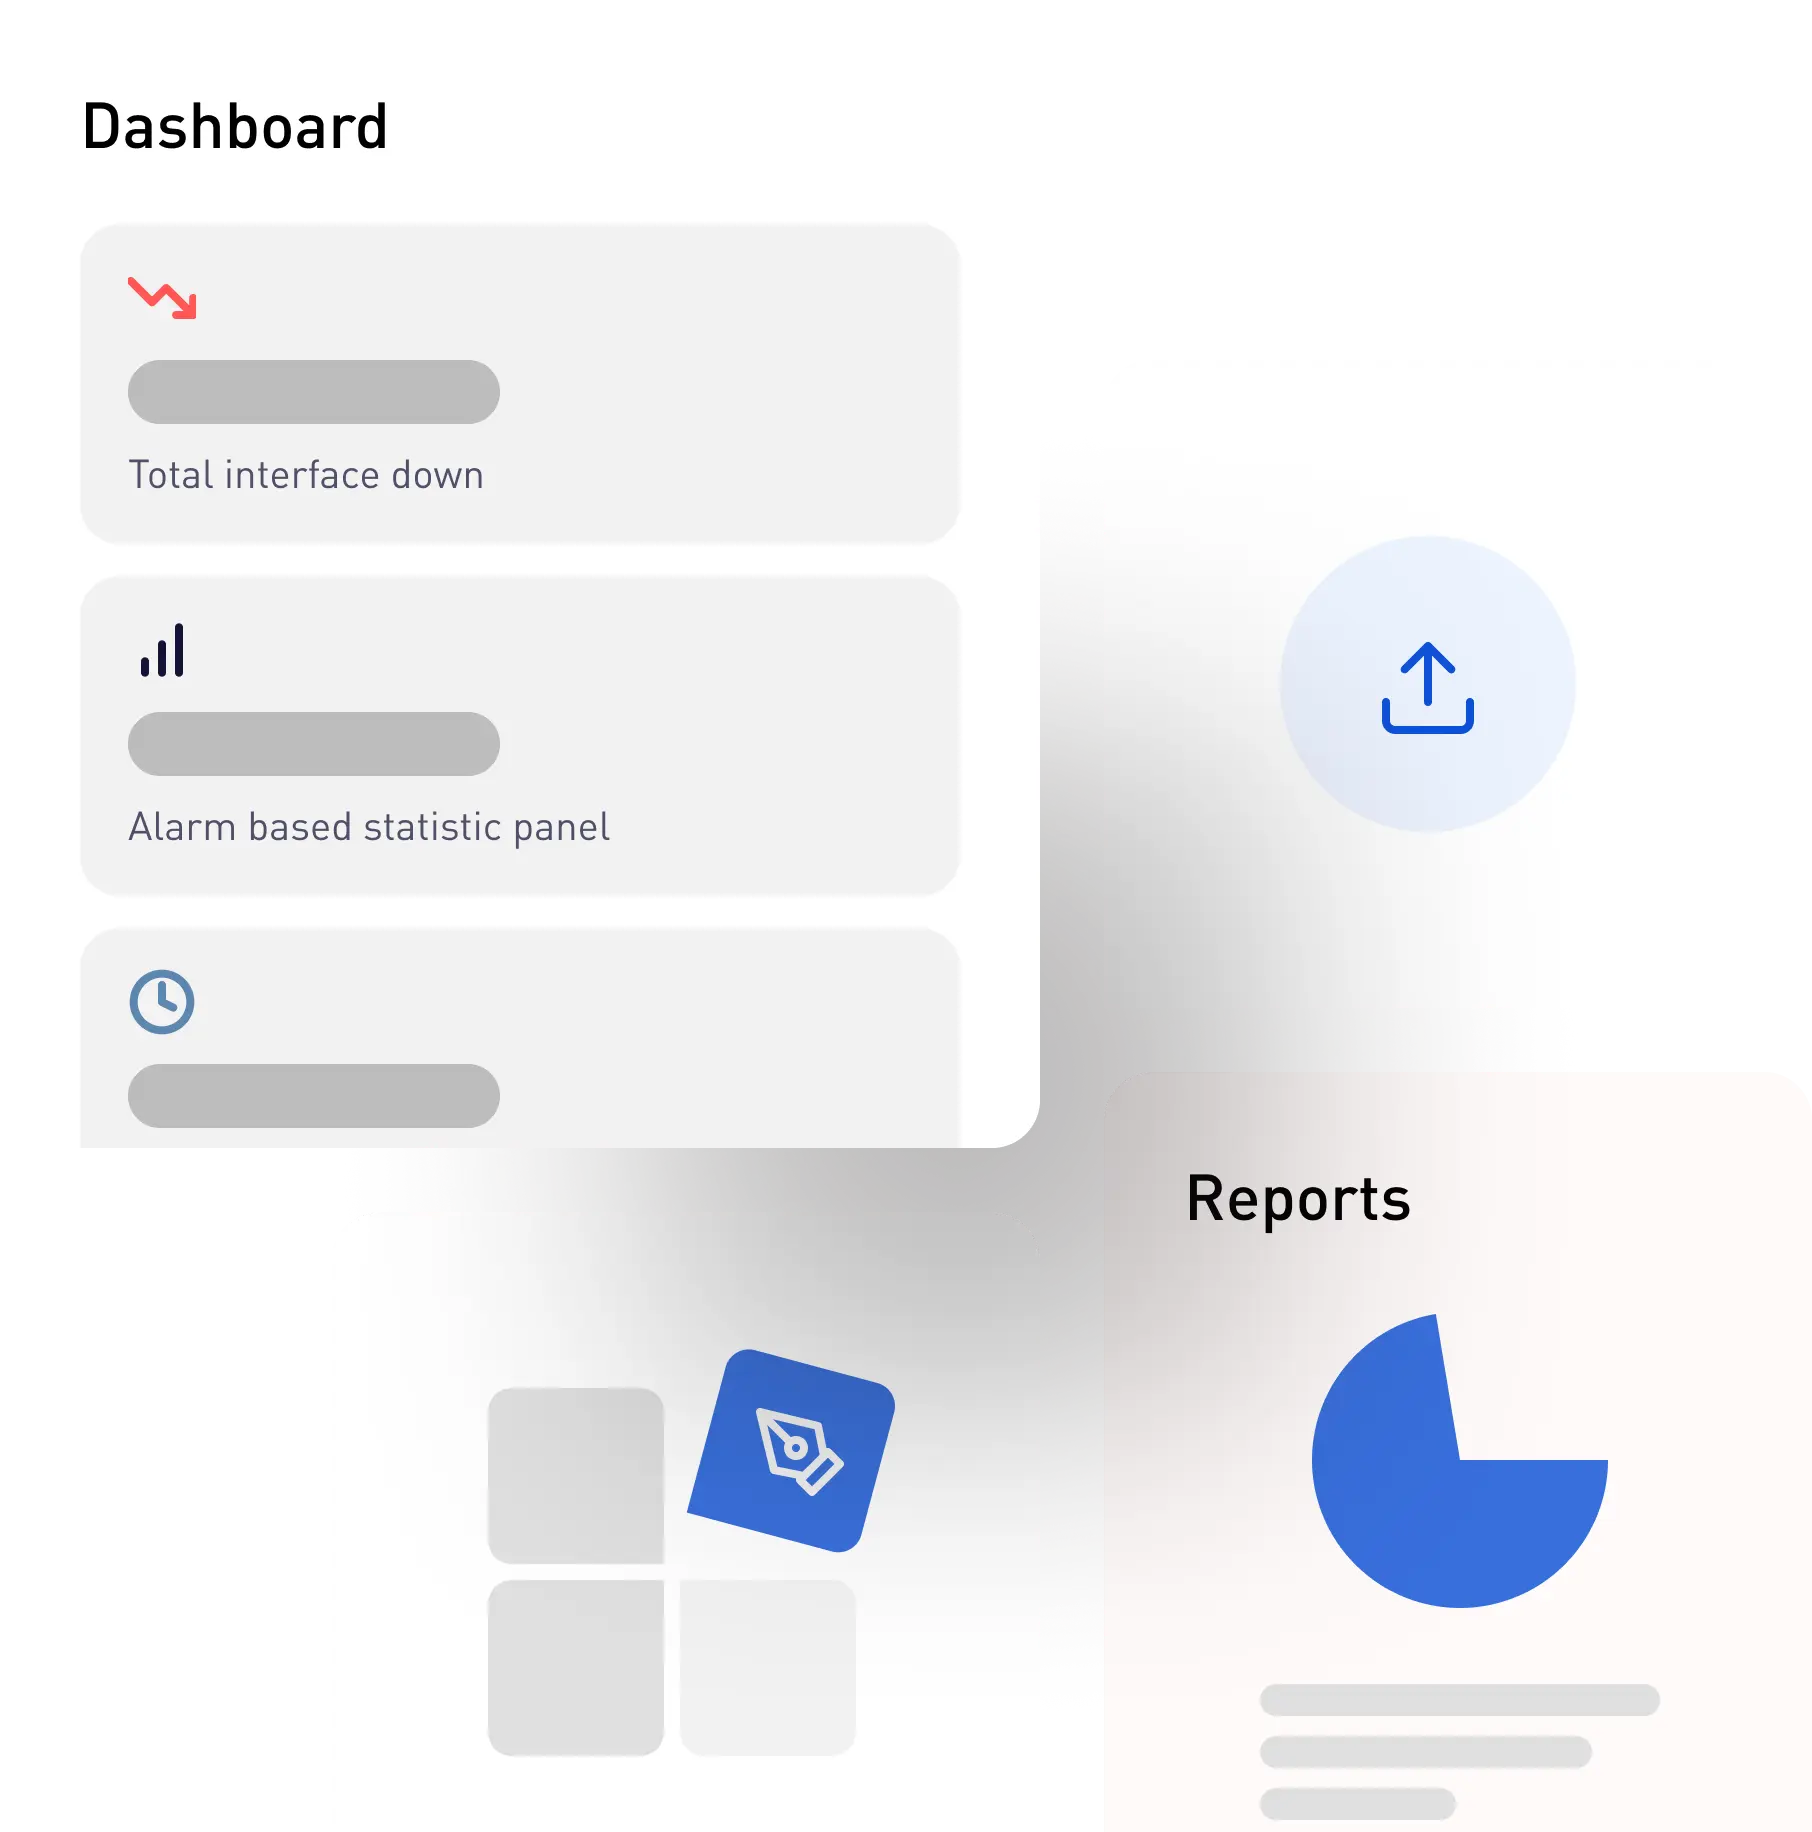 Dashboards and reports for IT, Hardware, and Software Assets